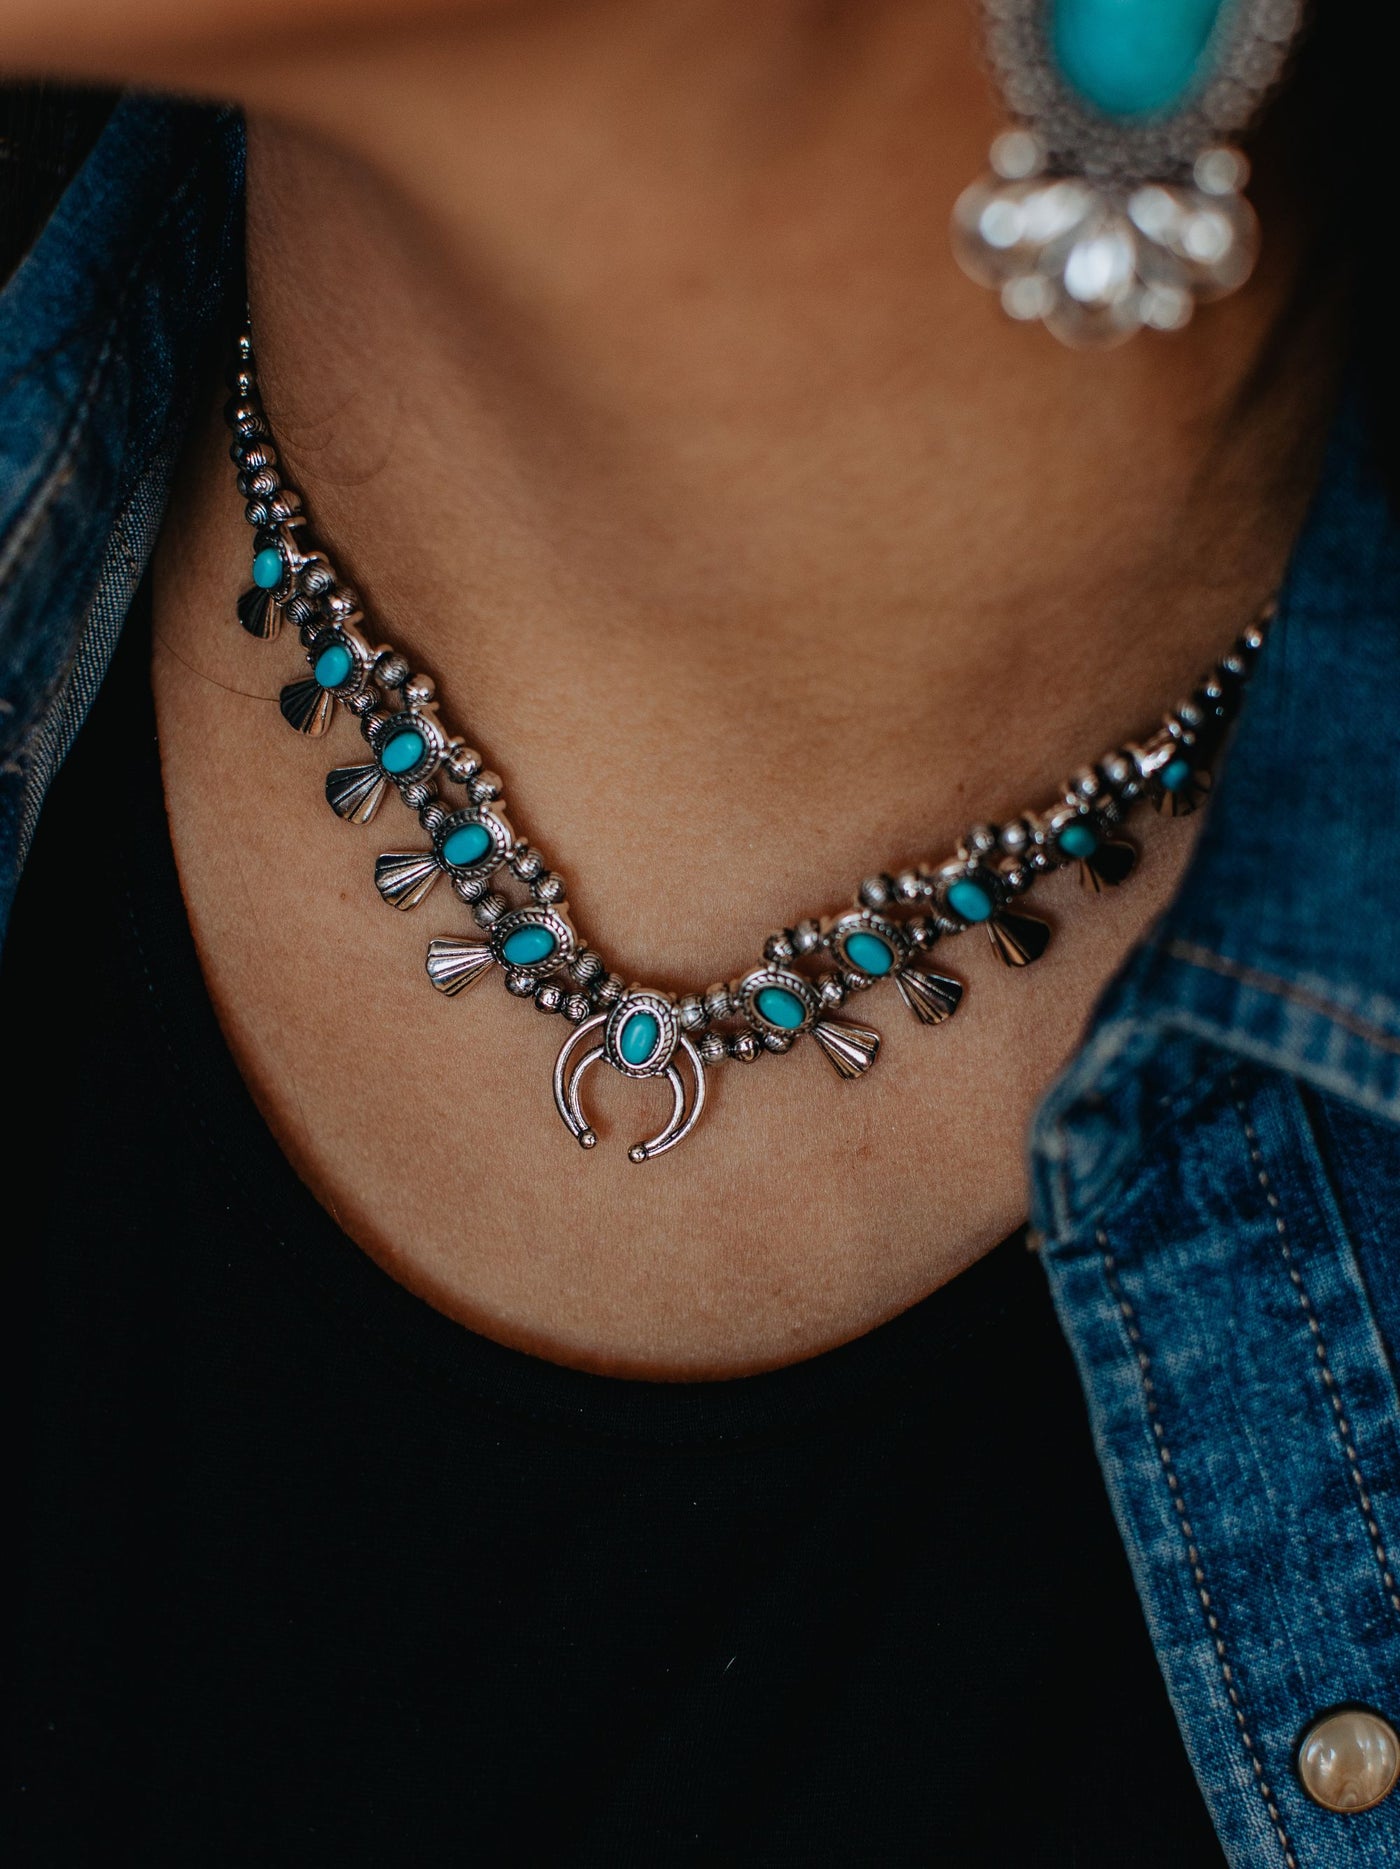 Moon Child Silver with turquoise stones necklace